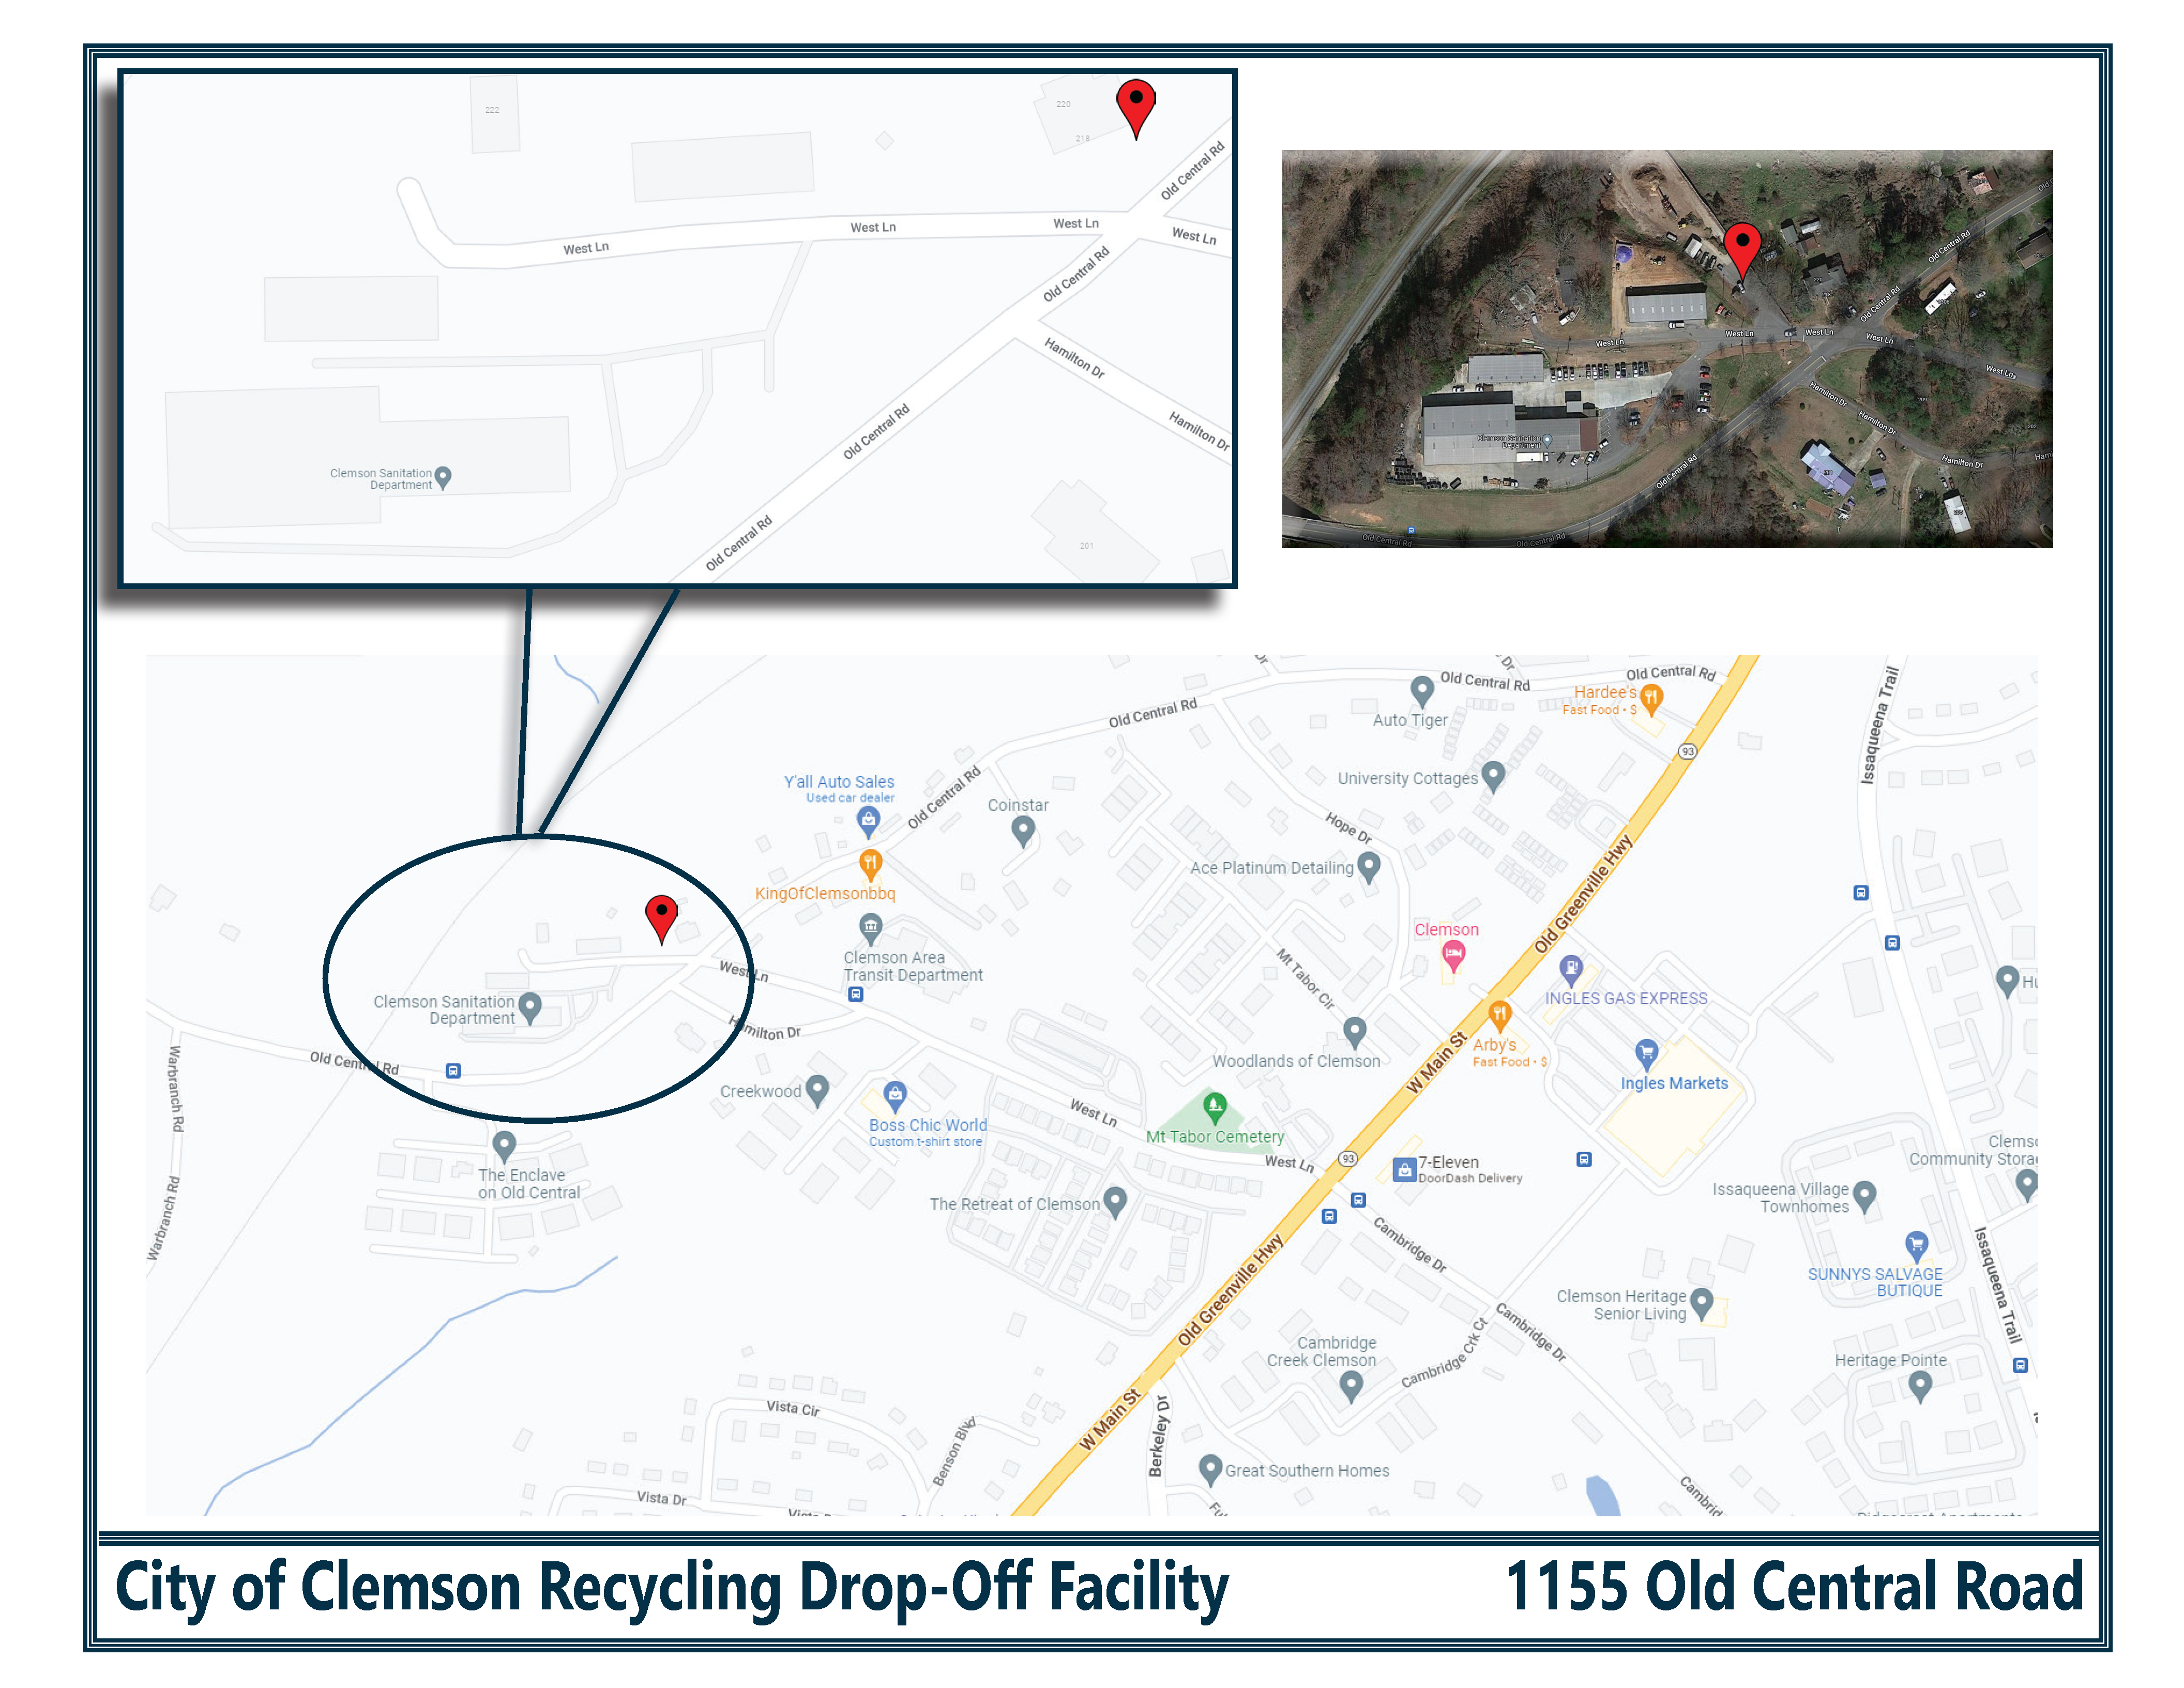 Click here to view a map to the City of Clemson recycling facility